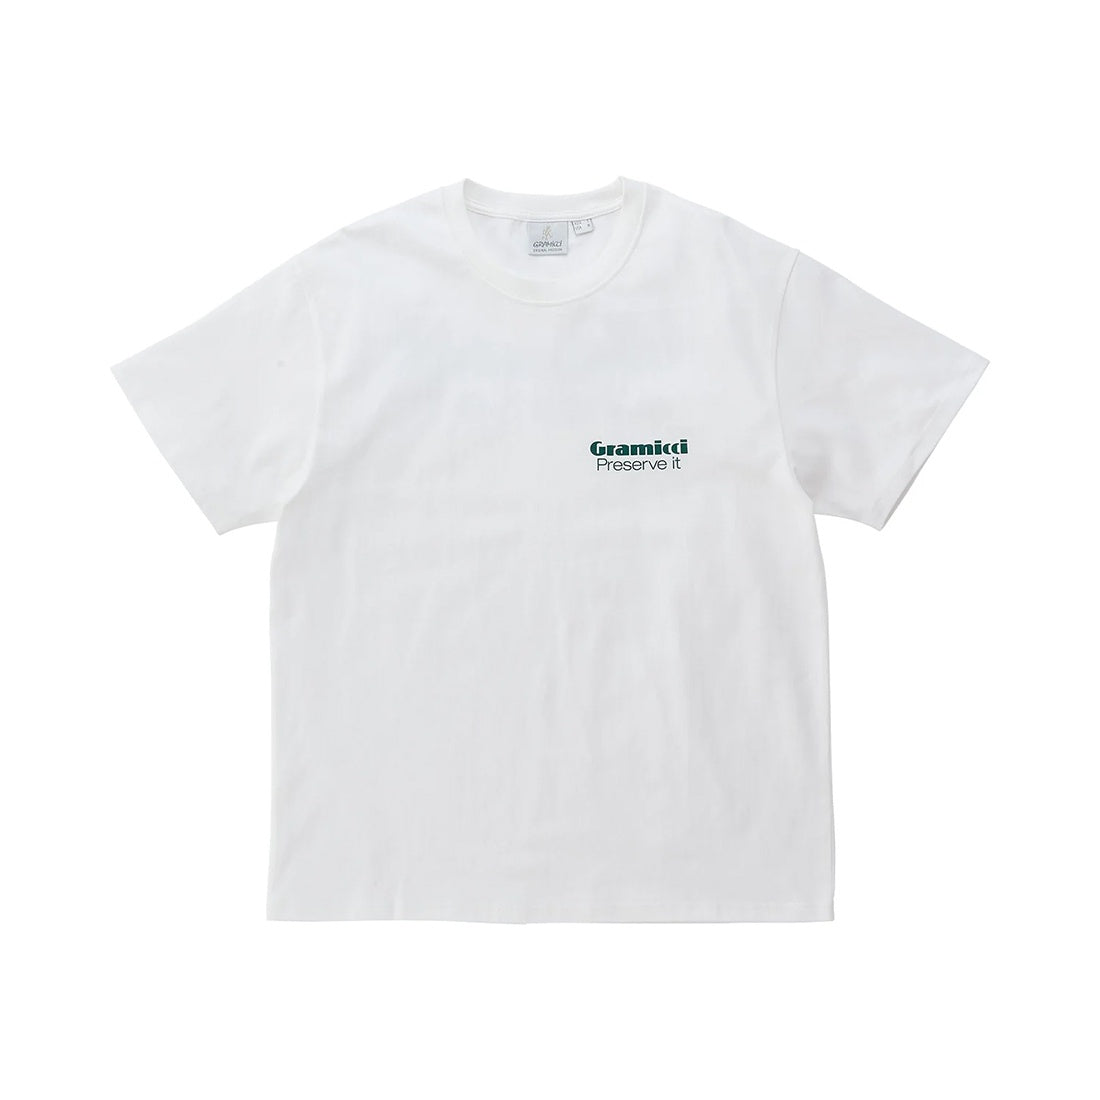 Preserved-IT Tee White